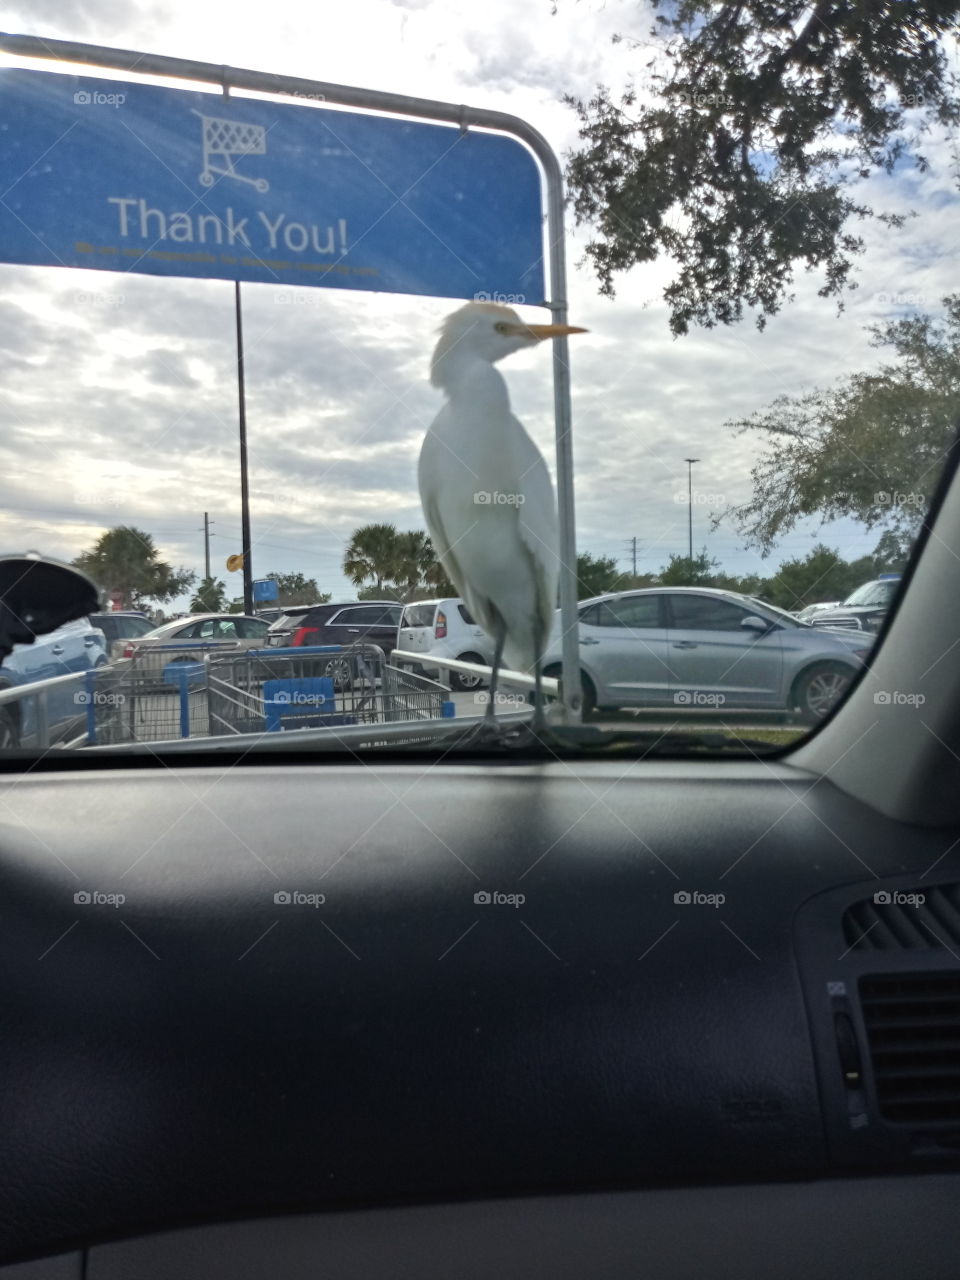 a white exotic bird that has landed on a car in the walmart parking lot